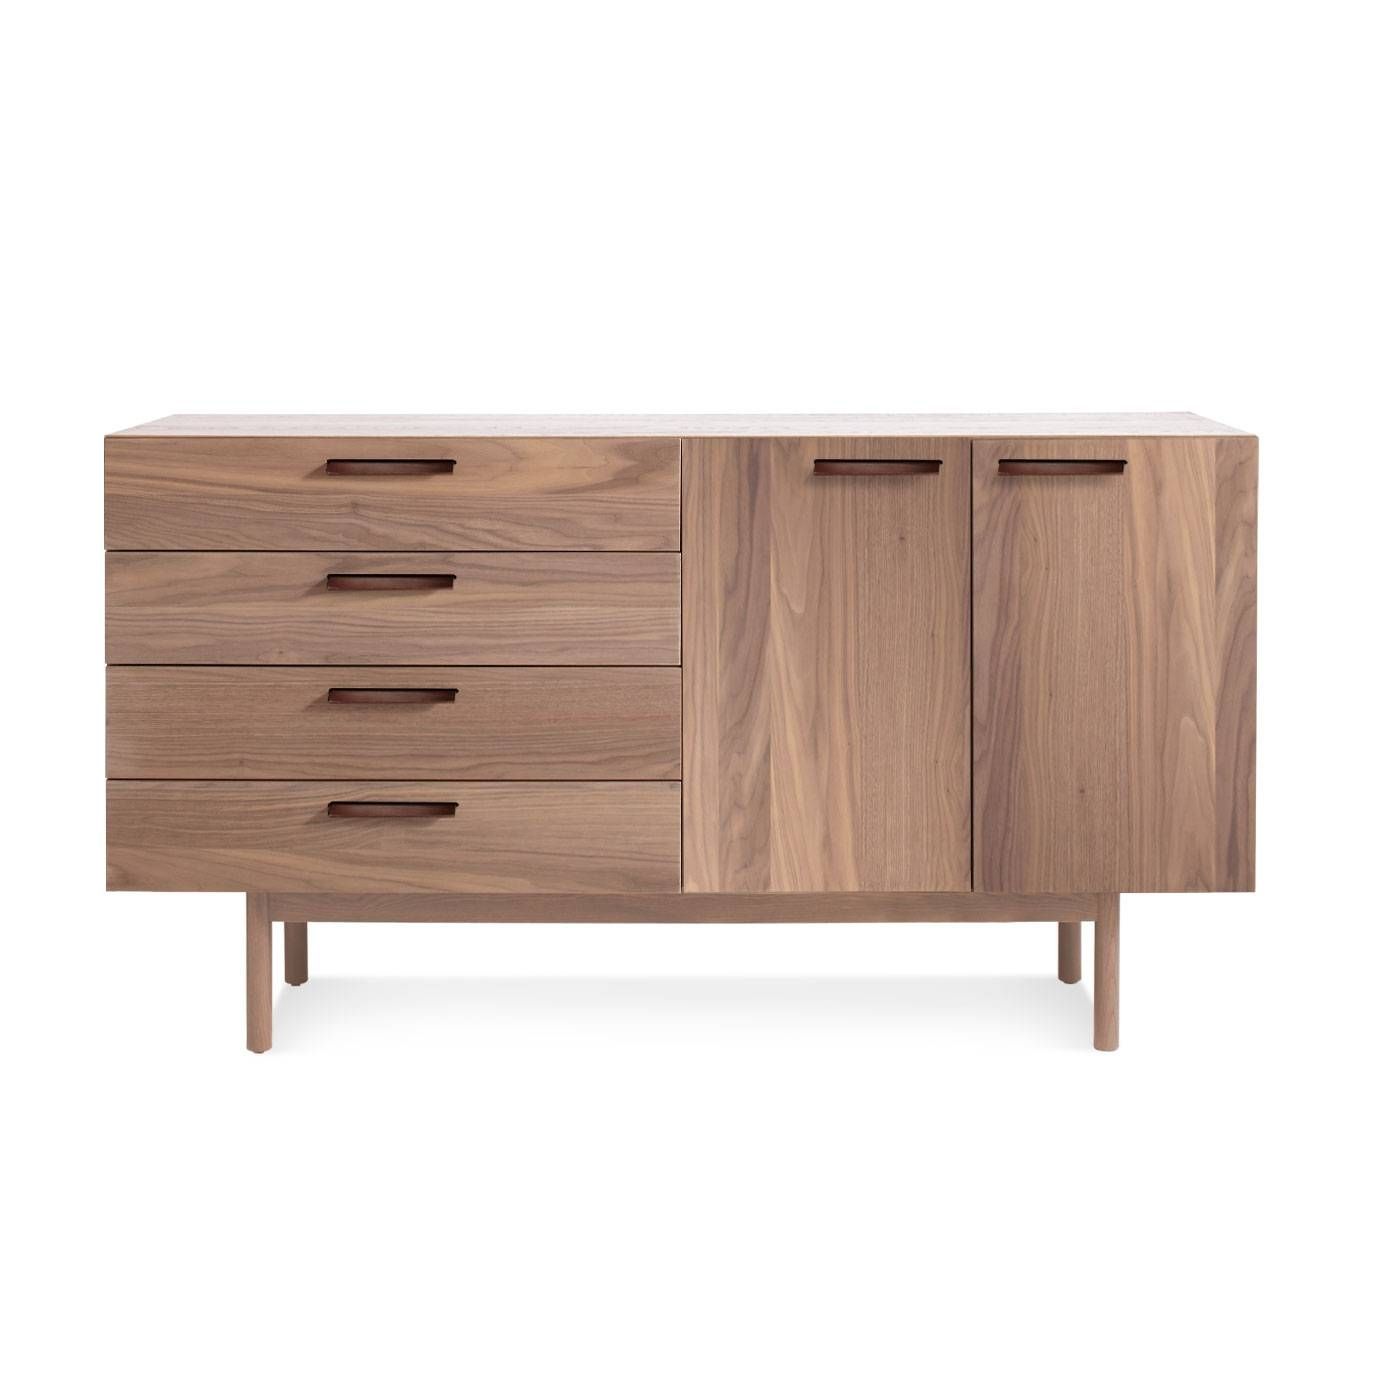 Shale 4 Drawer / 2 Door Modern Wood Sideboard | Blu Dot For Contemporary Wood Sideboards (View 23 of 30)